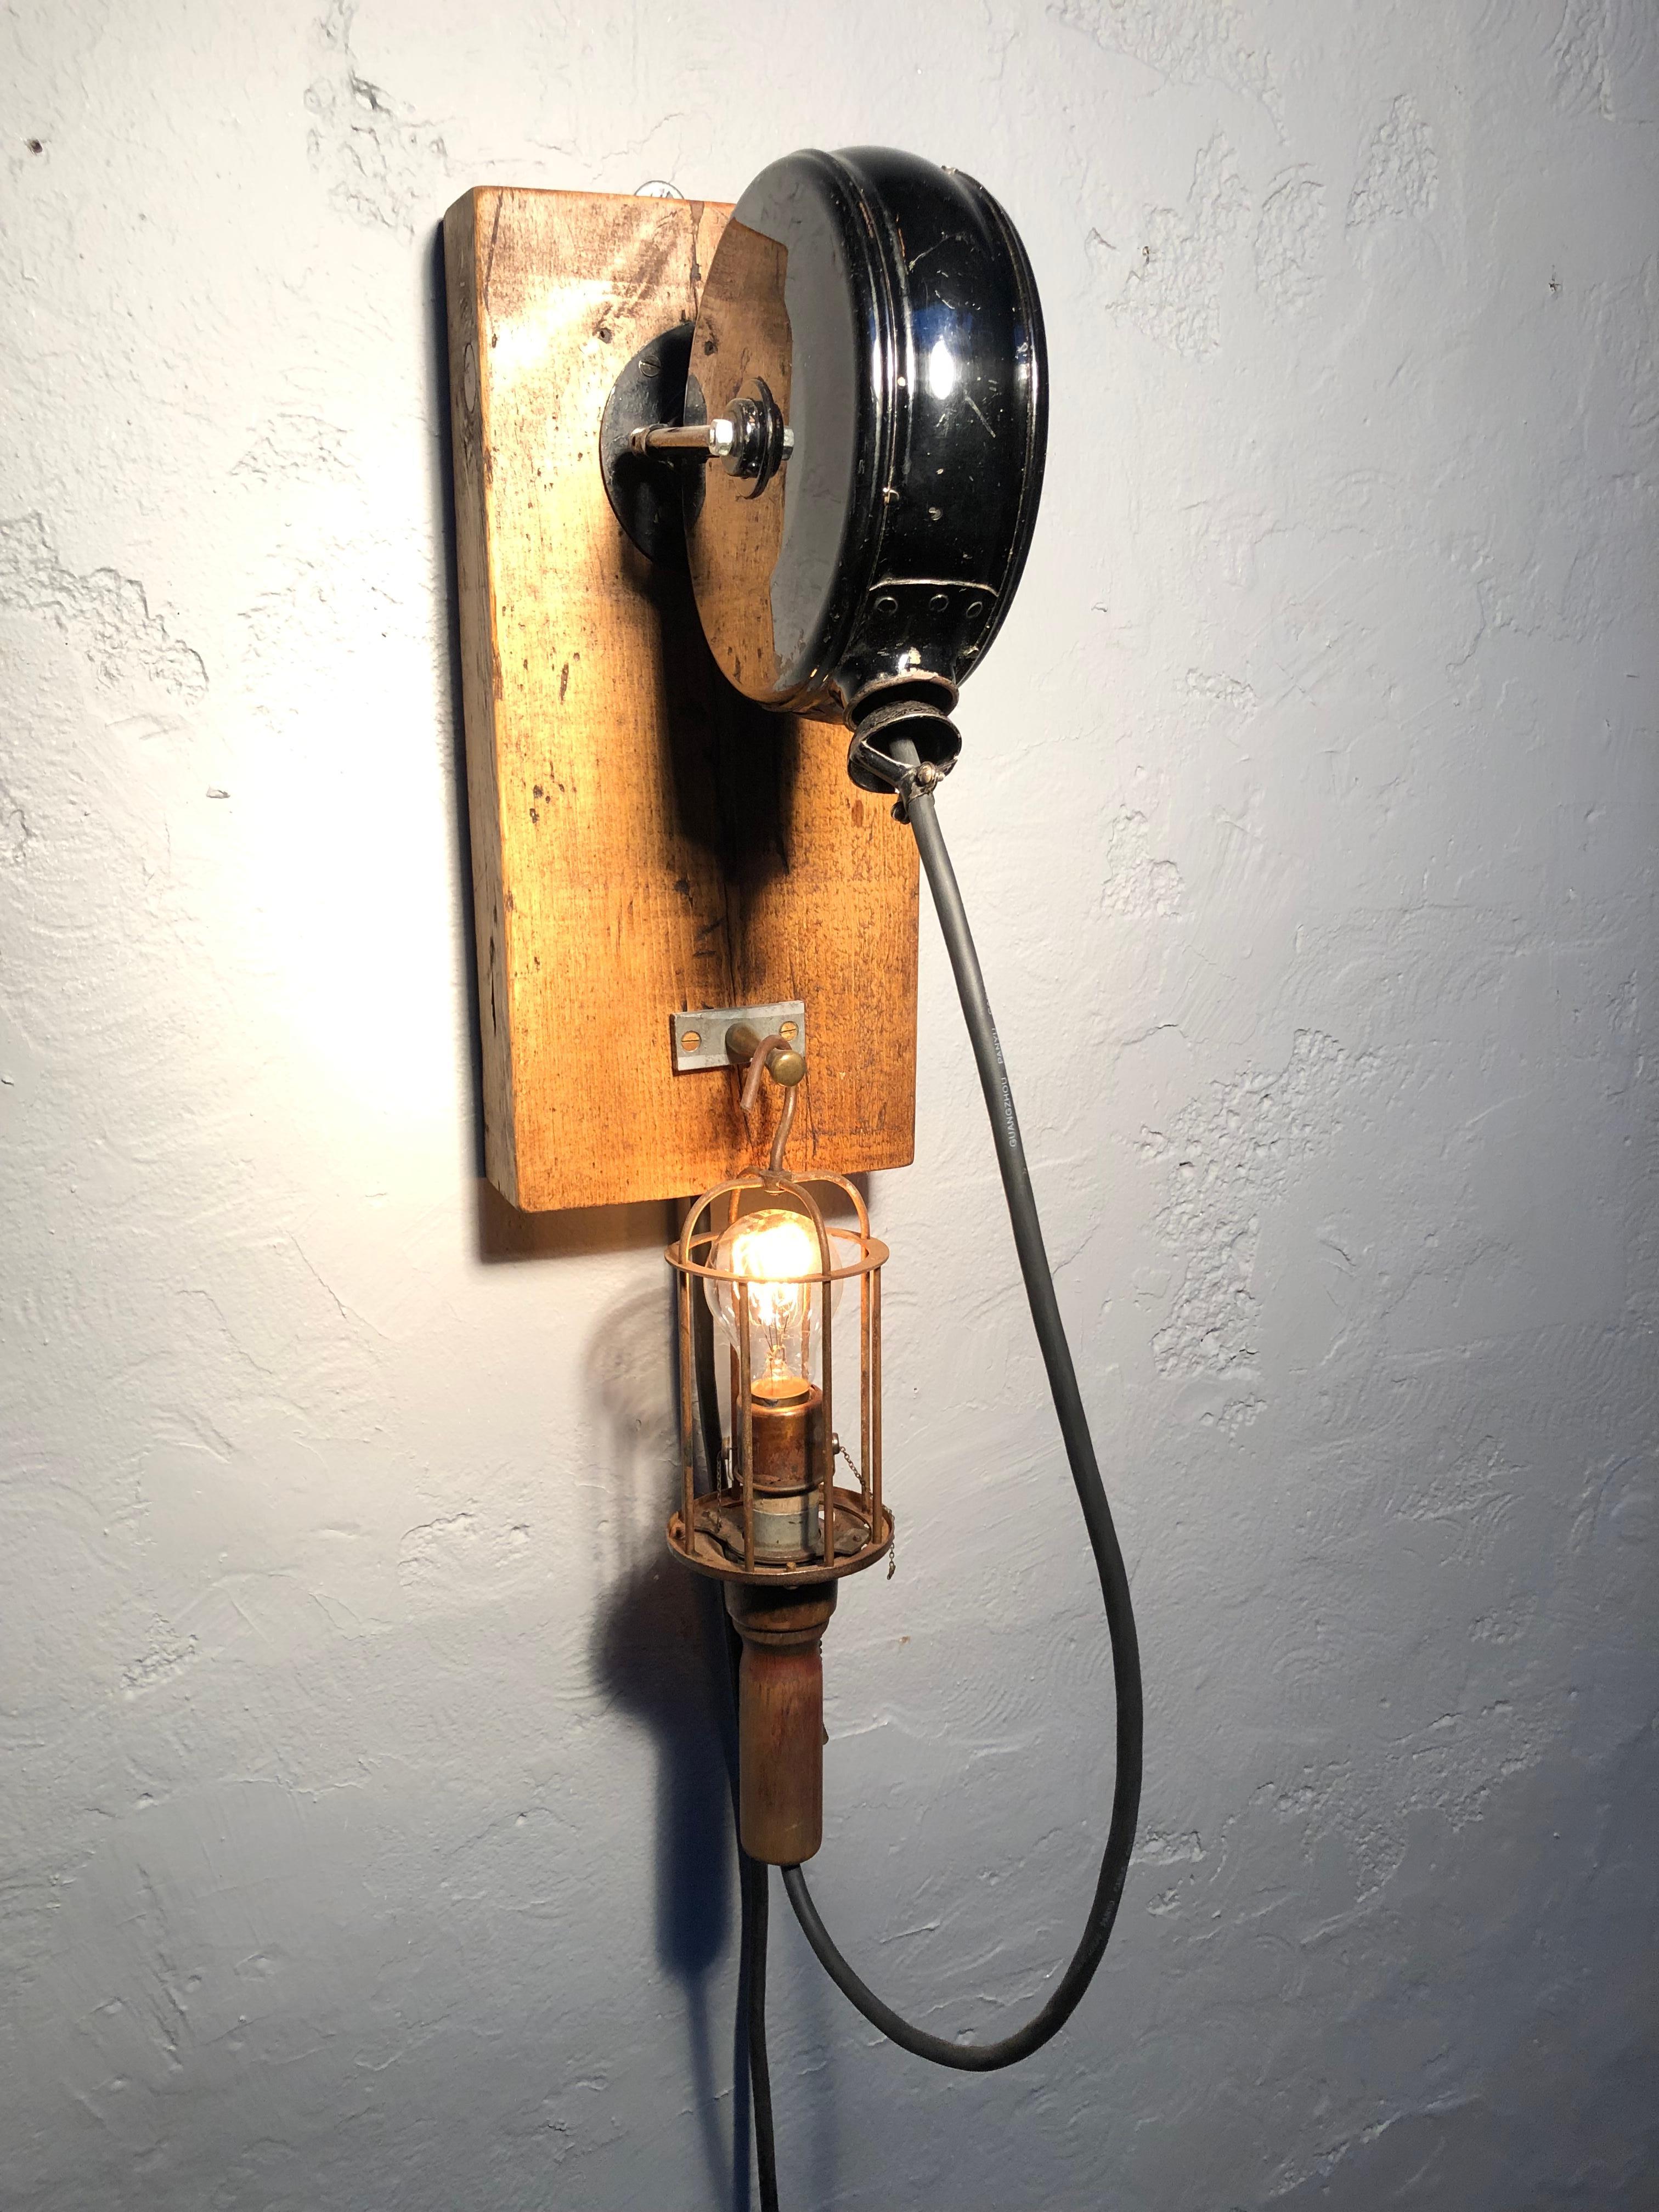 An antique industrial wall mounted retractable reel work lamp.
A very cool and versatile industrial lamp. 
Fitted with an antique dimmer switch and an antique carbon filament lamp bulb. 
Wood and brass caged lamp.
Brass hanging hook. 
Pine mounting